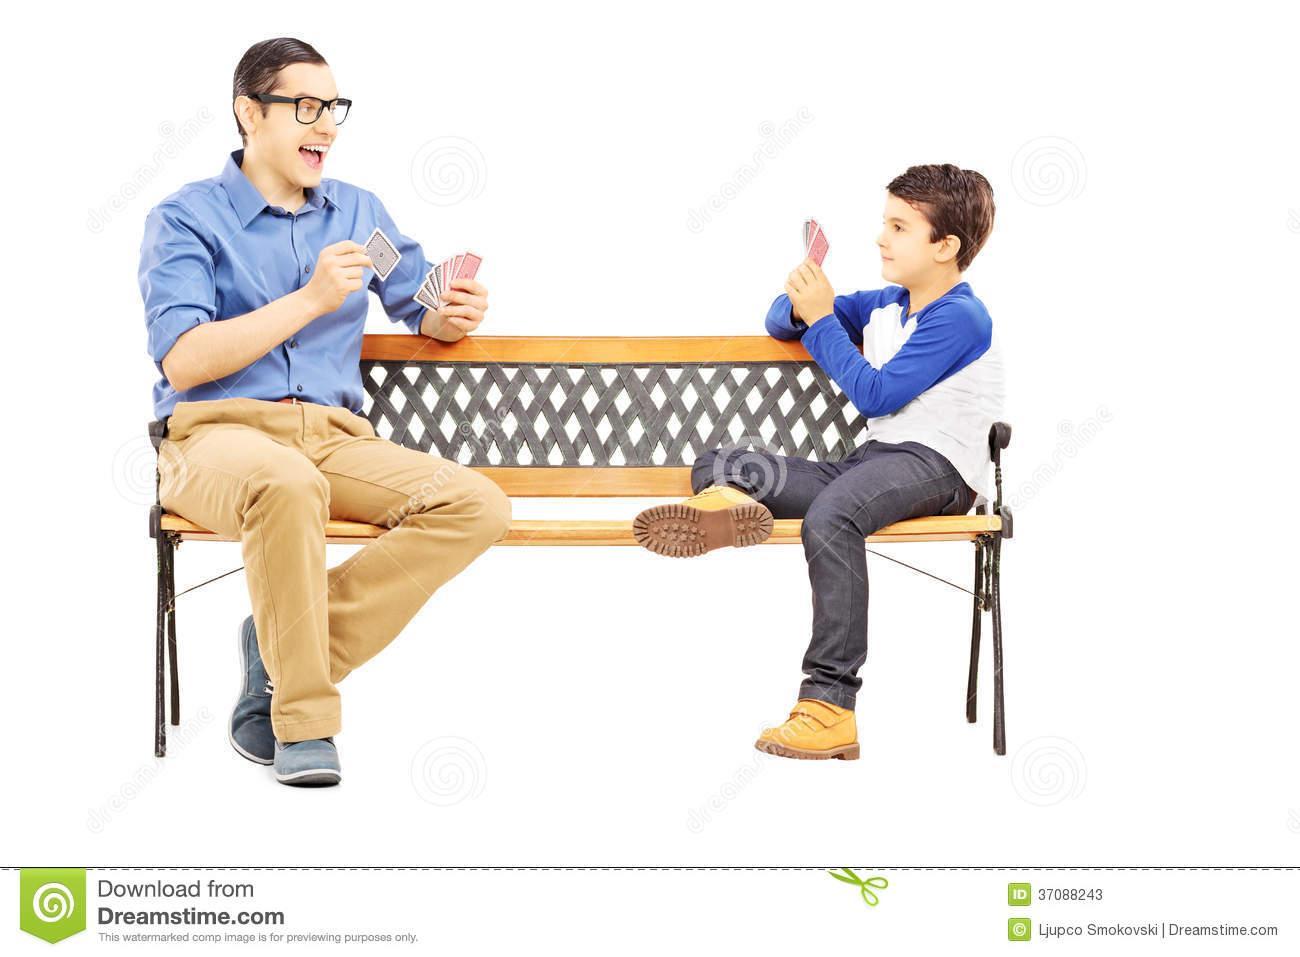 Young Boy Playing Cards With His Older Cousin Seated On Bench Isolated